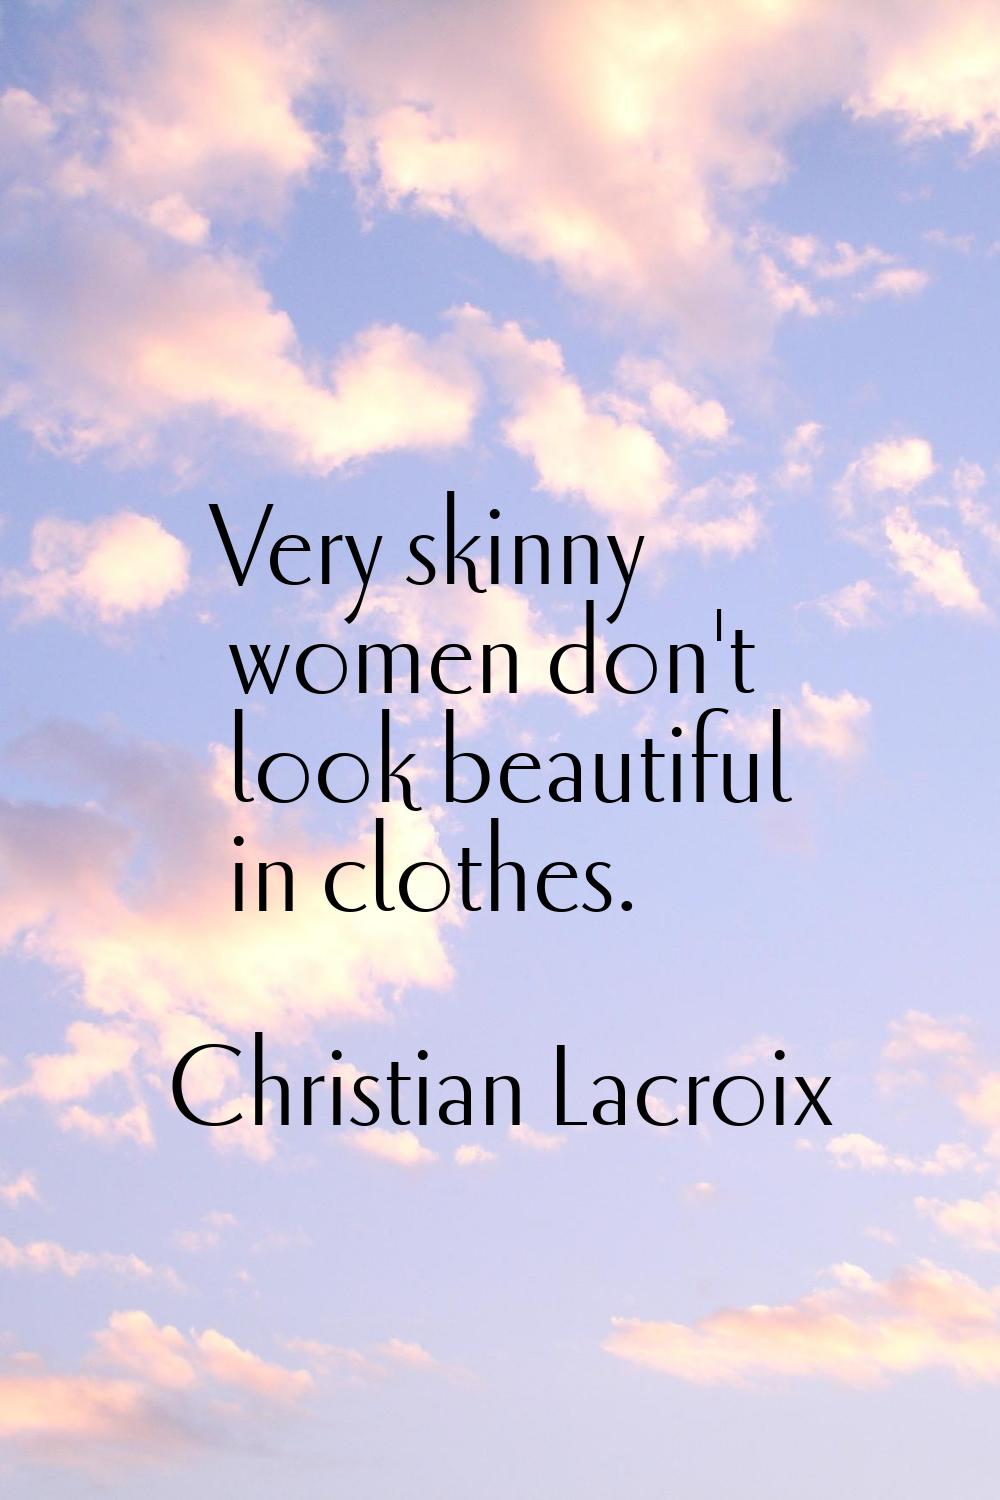 Very skinny women don't look beautiful in clothes.